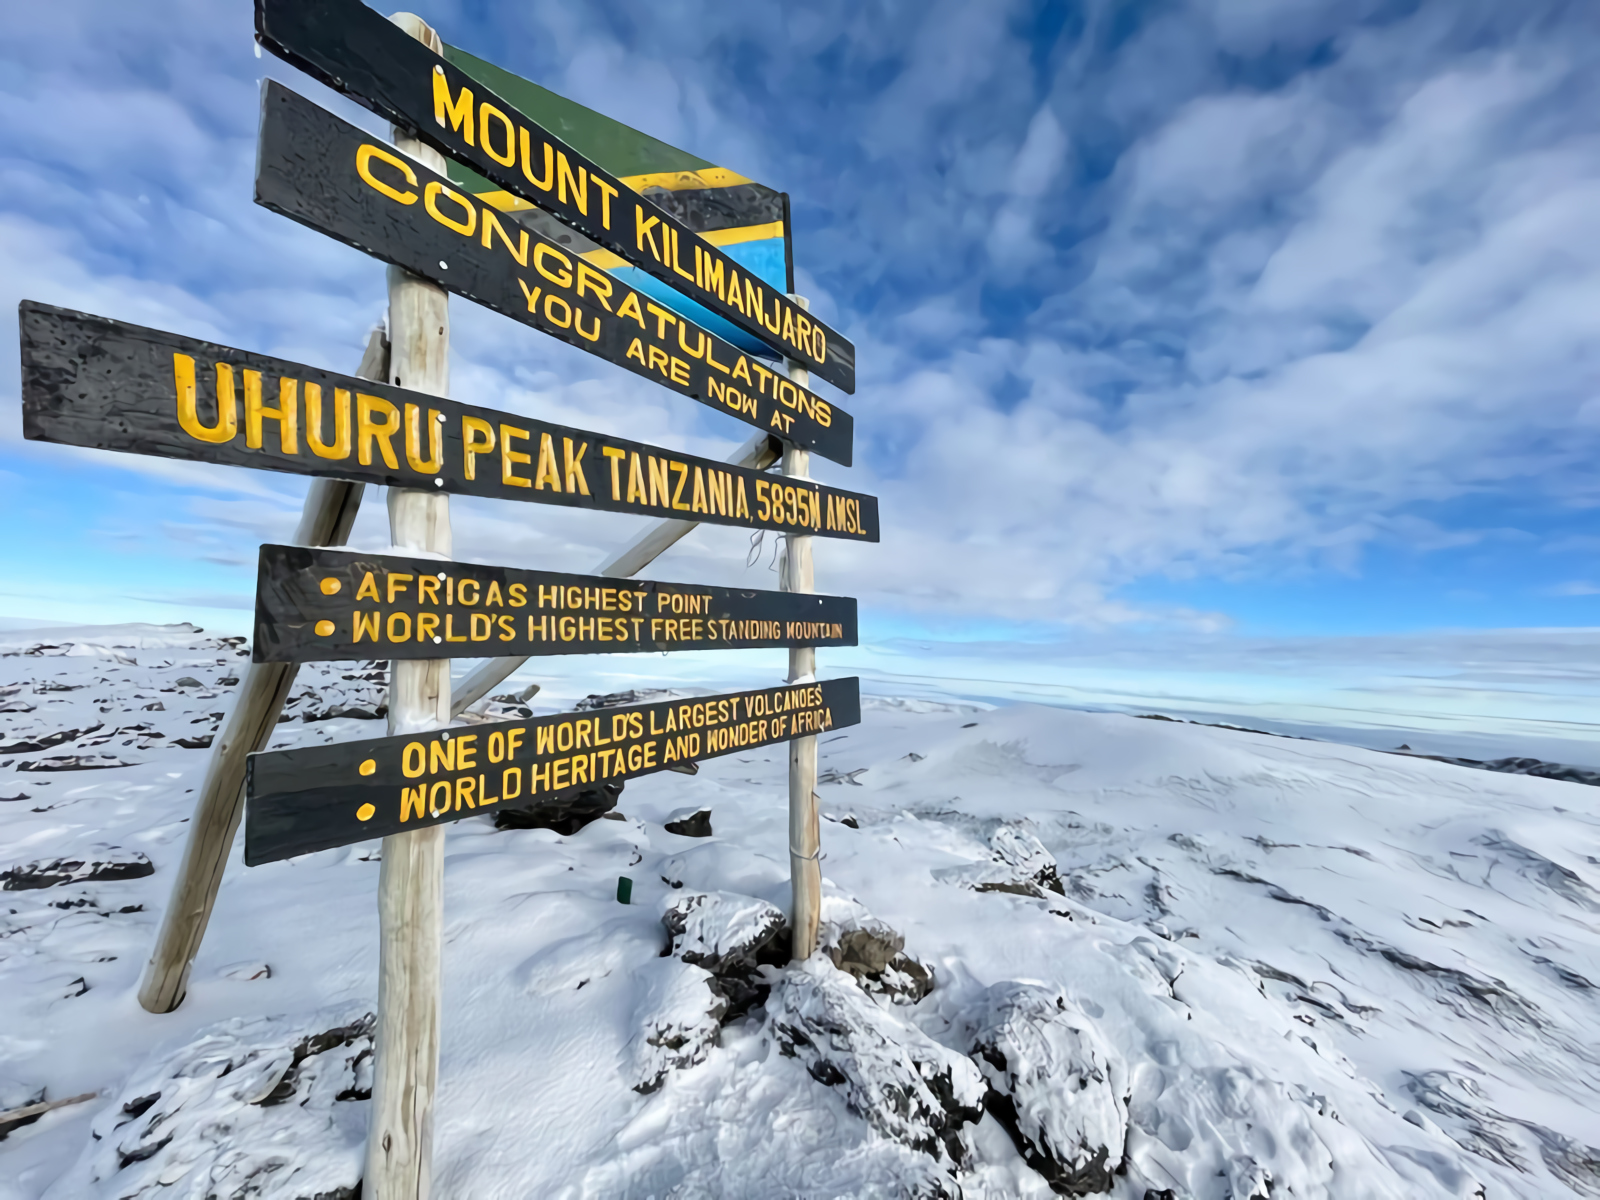 Best Route for Climbing Kilimanjaro